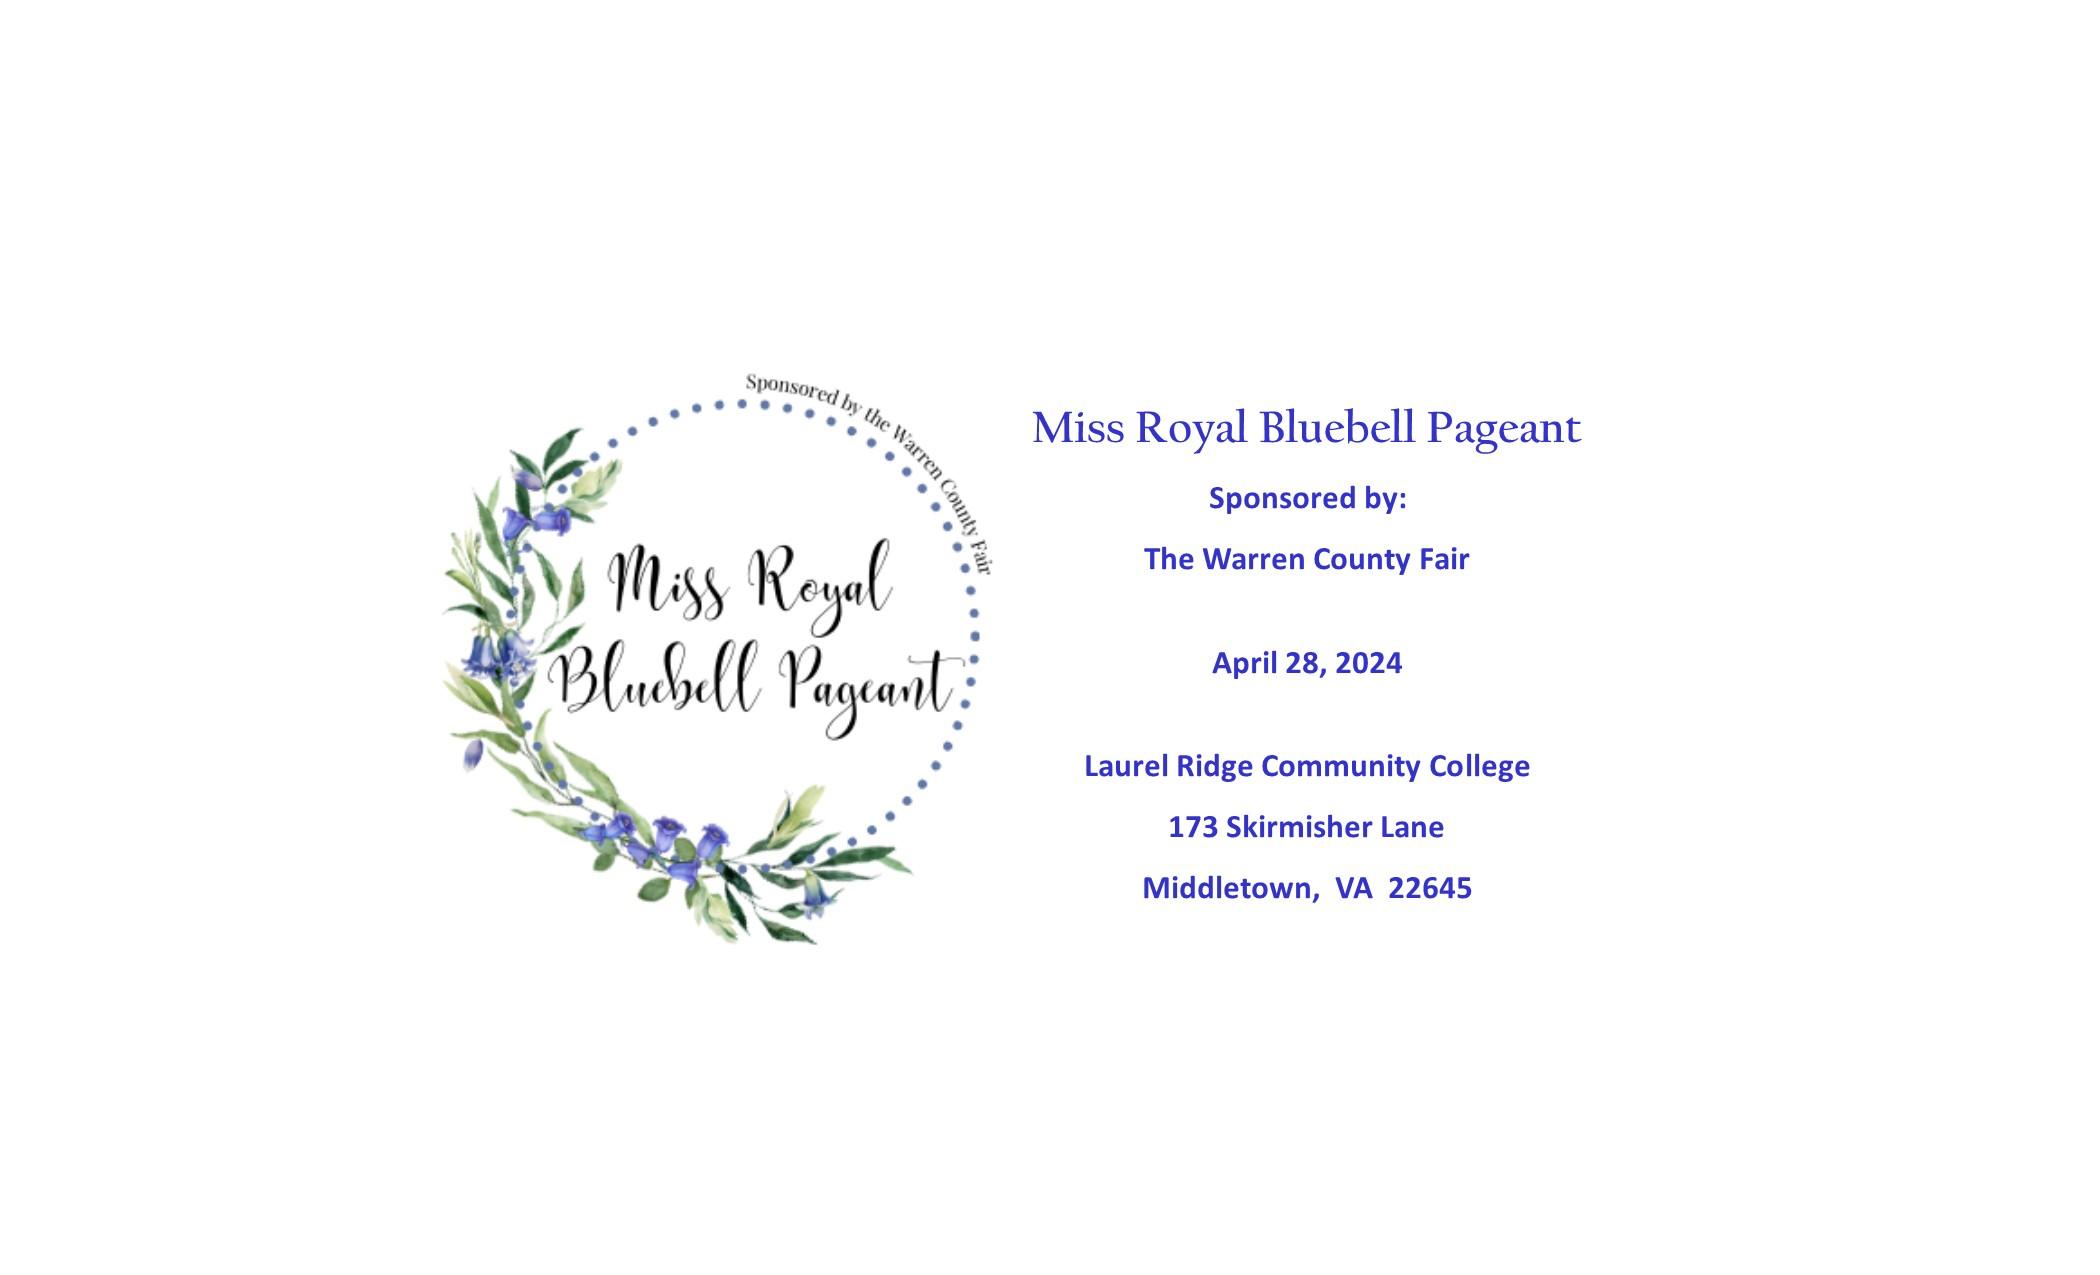 Miss Royal Bluebell Pageant